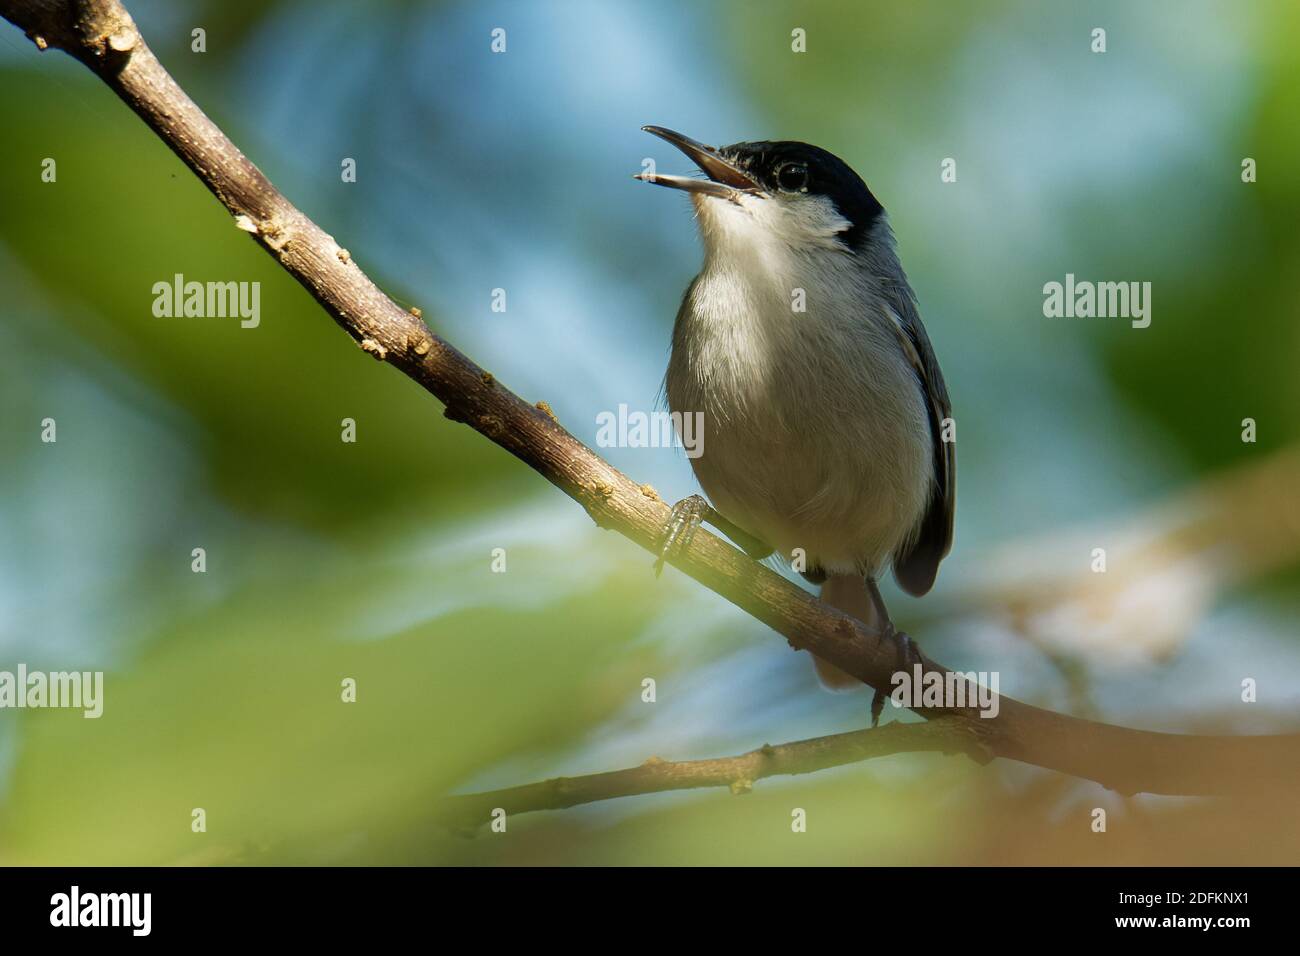 Black-capped Gnatcatcher - Polioptila nigriceps, bird is blue-grey on the upperparts with white underparts, long slender bill and a long black tail wi Stock Photo